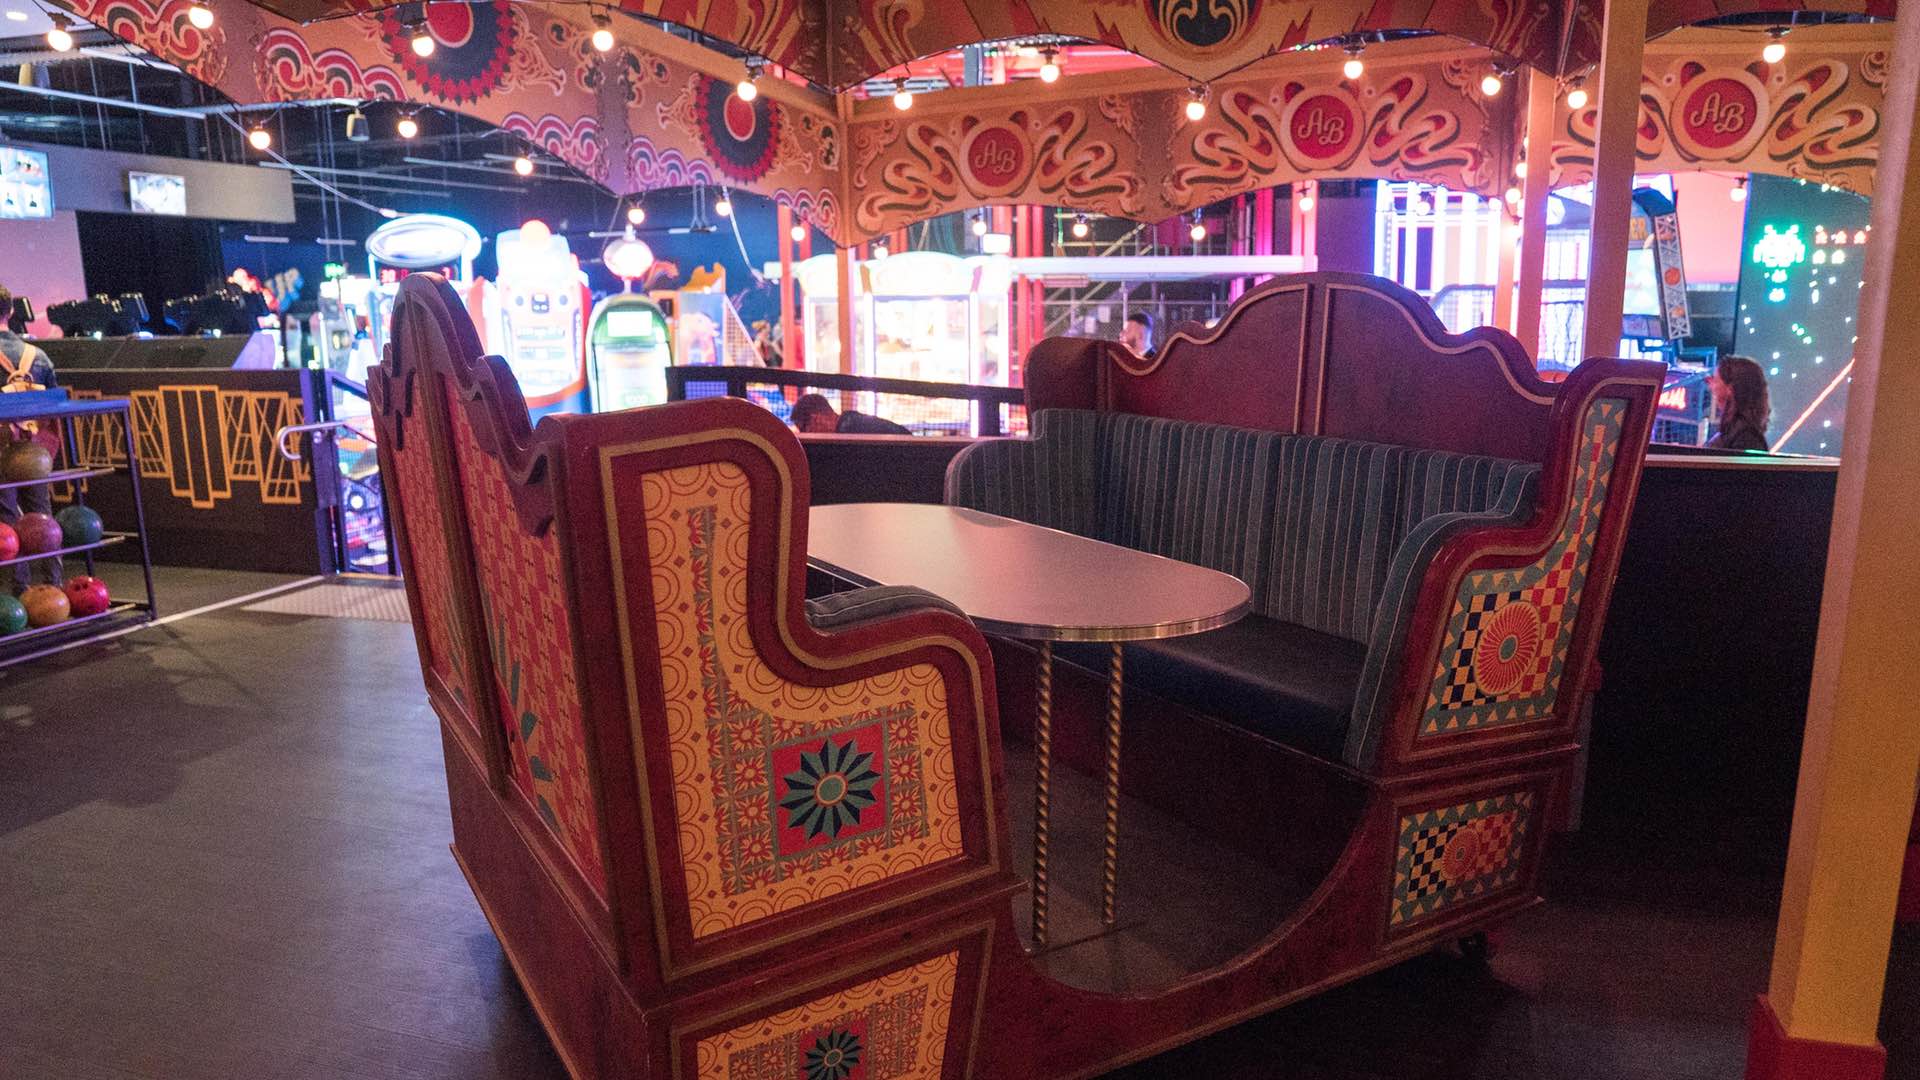 The Holey Moley Team Is Opening a Novelty Circus-Themed Arcade Bar for Kidults